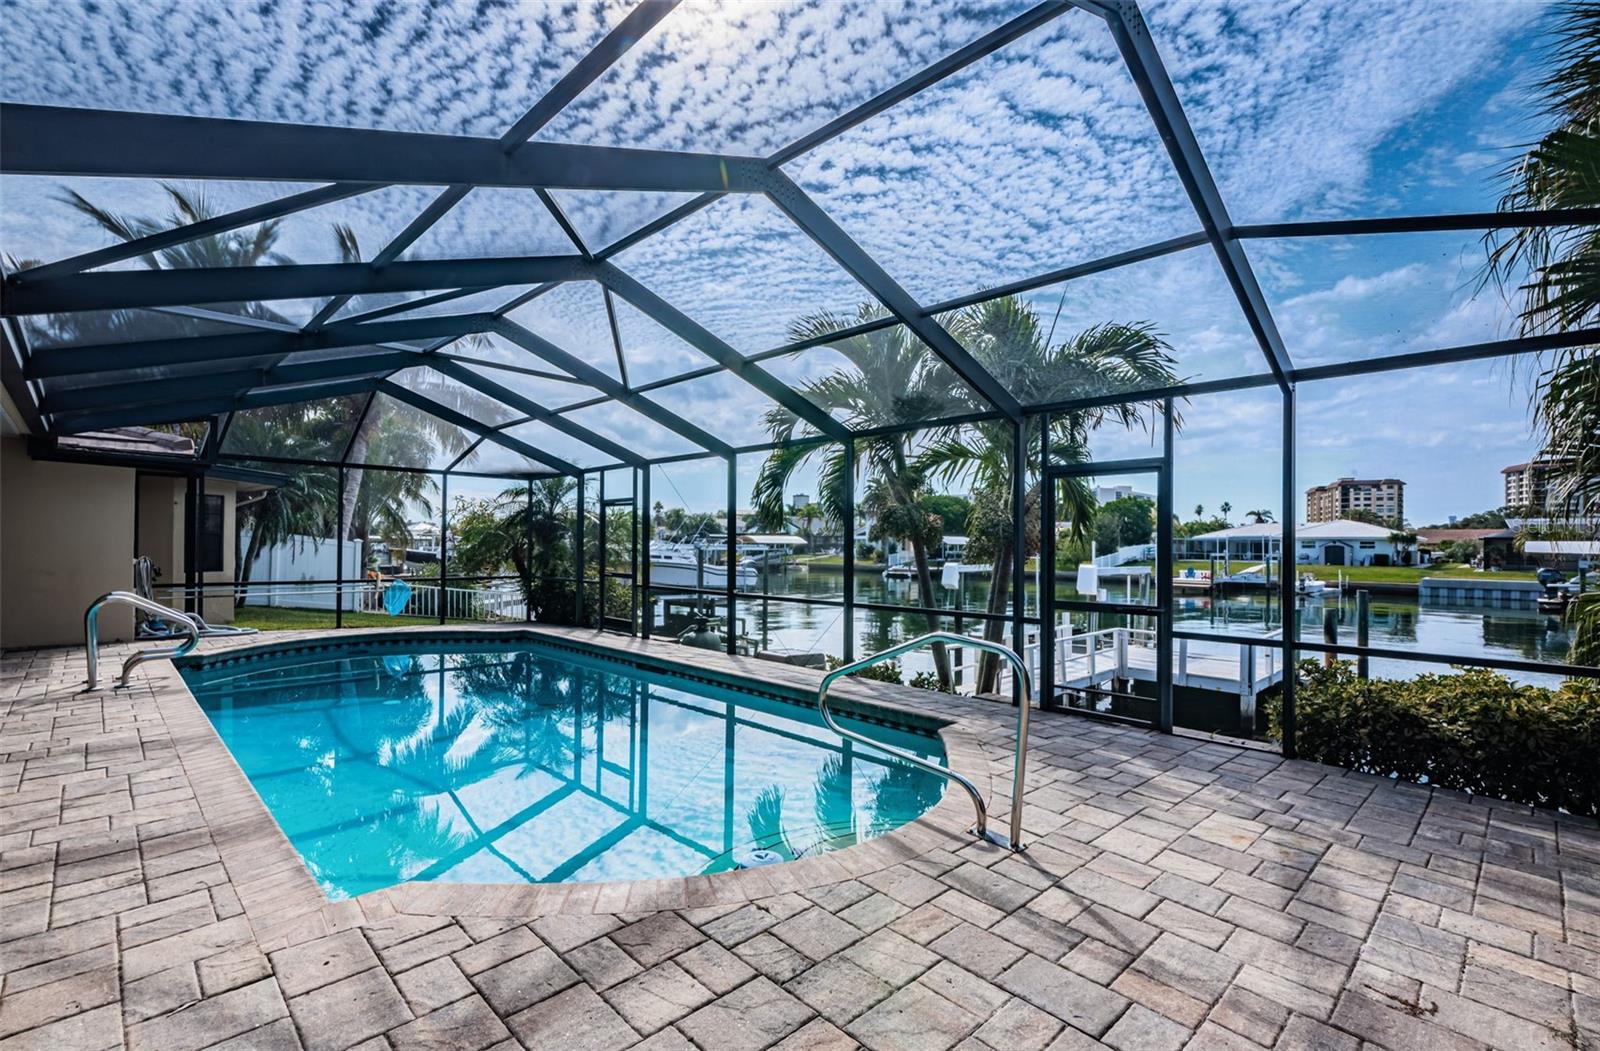 It comes complete with a screened lanai and a refreshing pool, offering the perfect blend of relaxation and recreation. The lanai provides a bug-free oasis where you can unwind, dine, or simply soak up the sun.